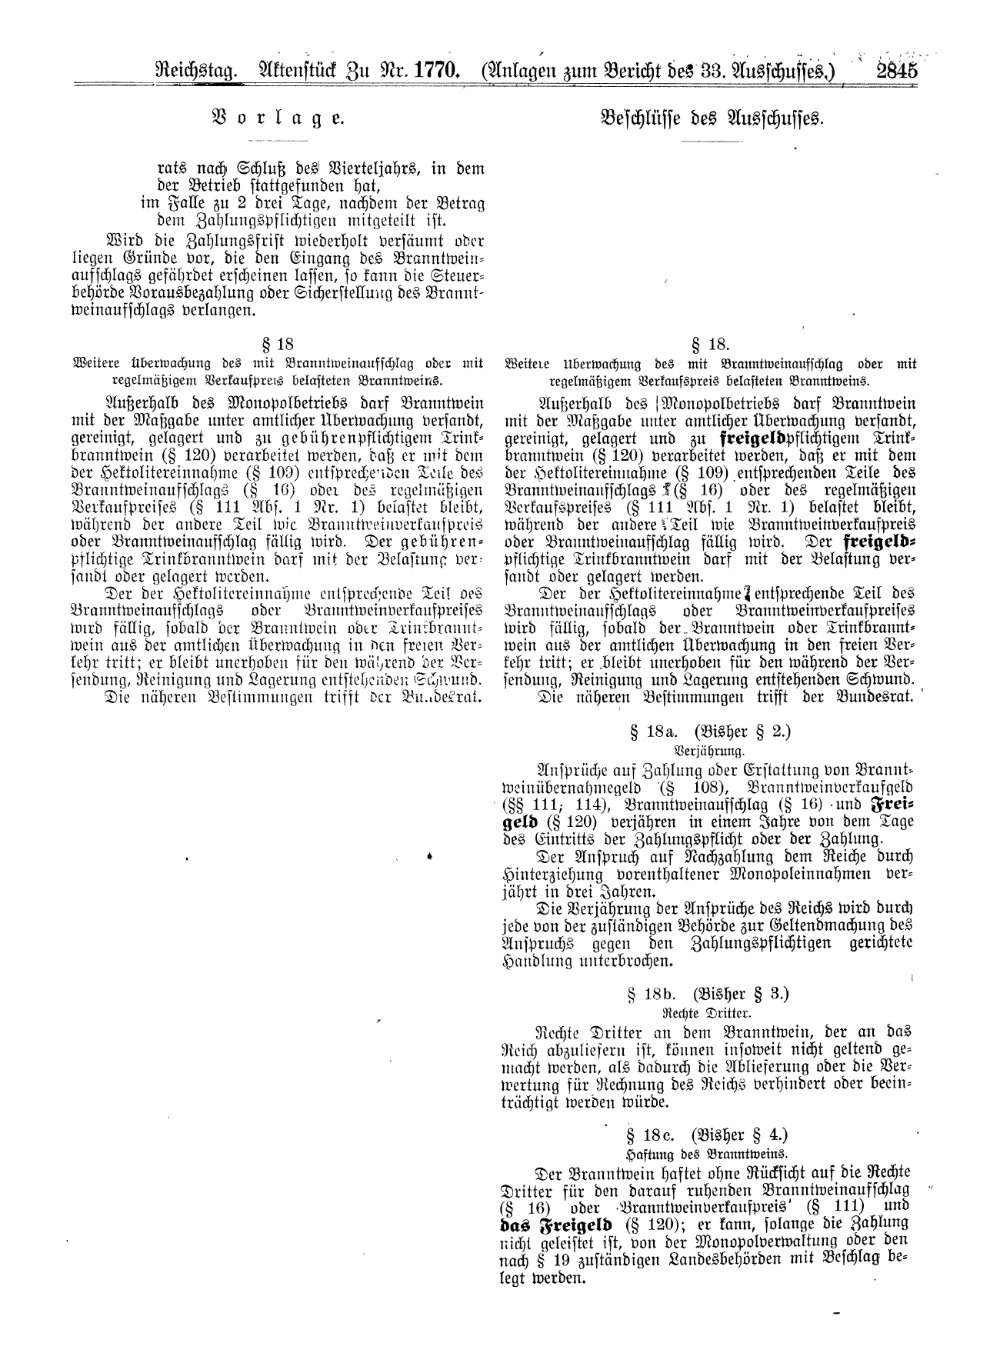 Scan of page 2845